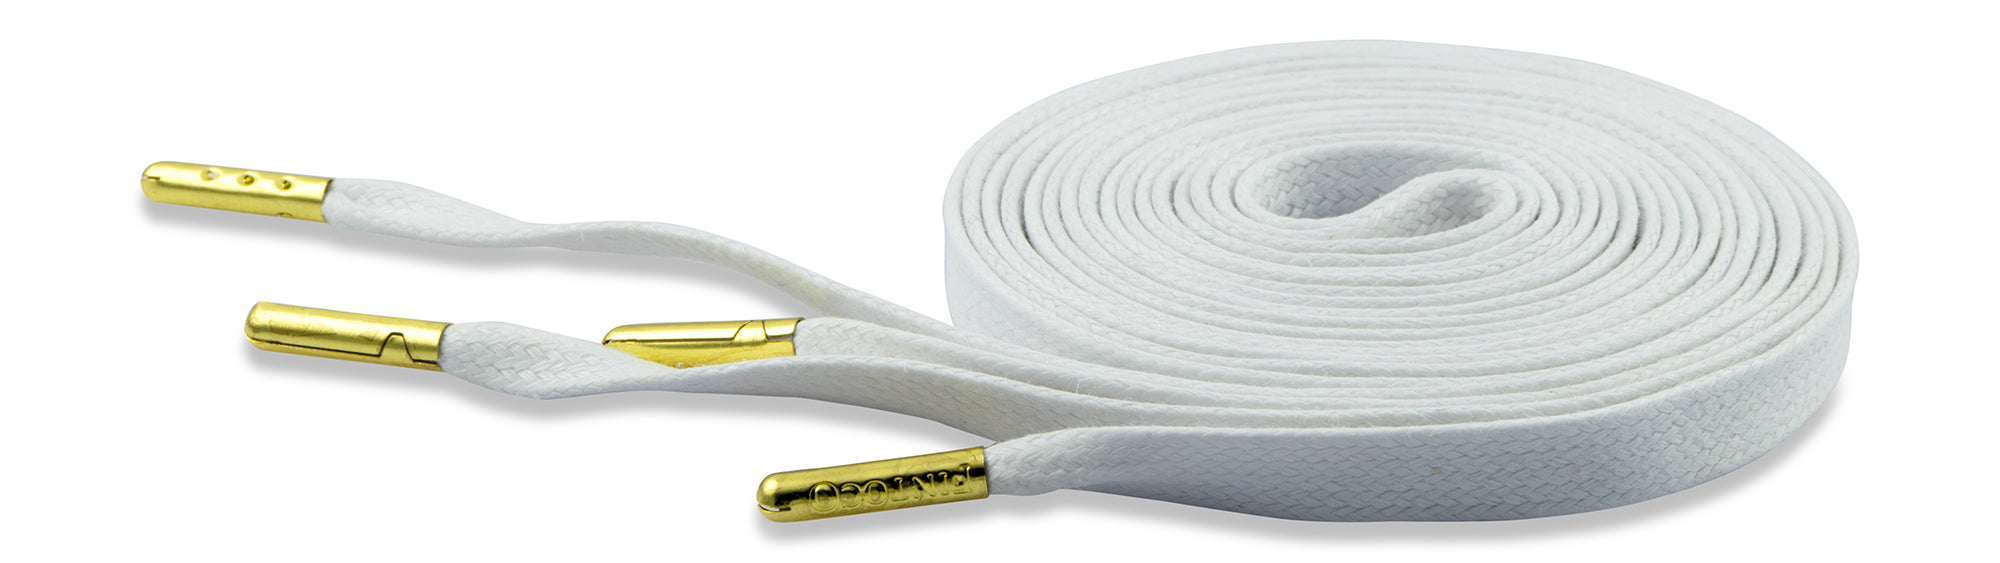 Flat Waxed Athletic Shoelaces - White with Gold Tips